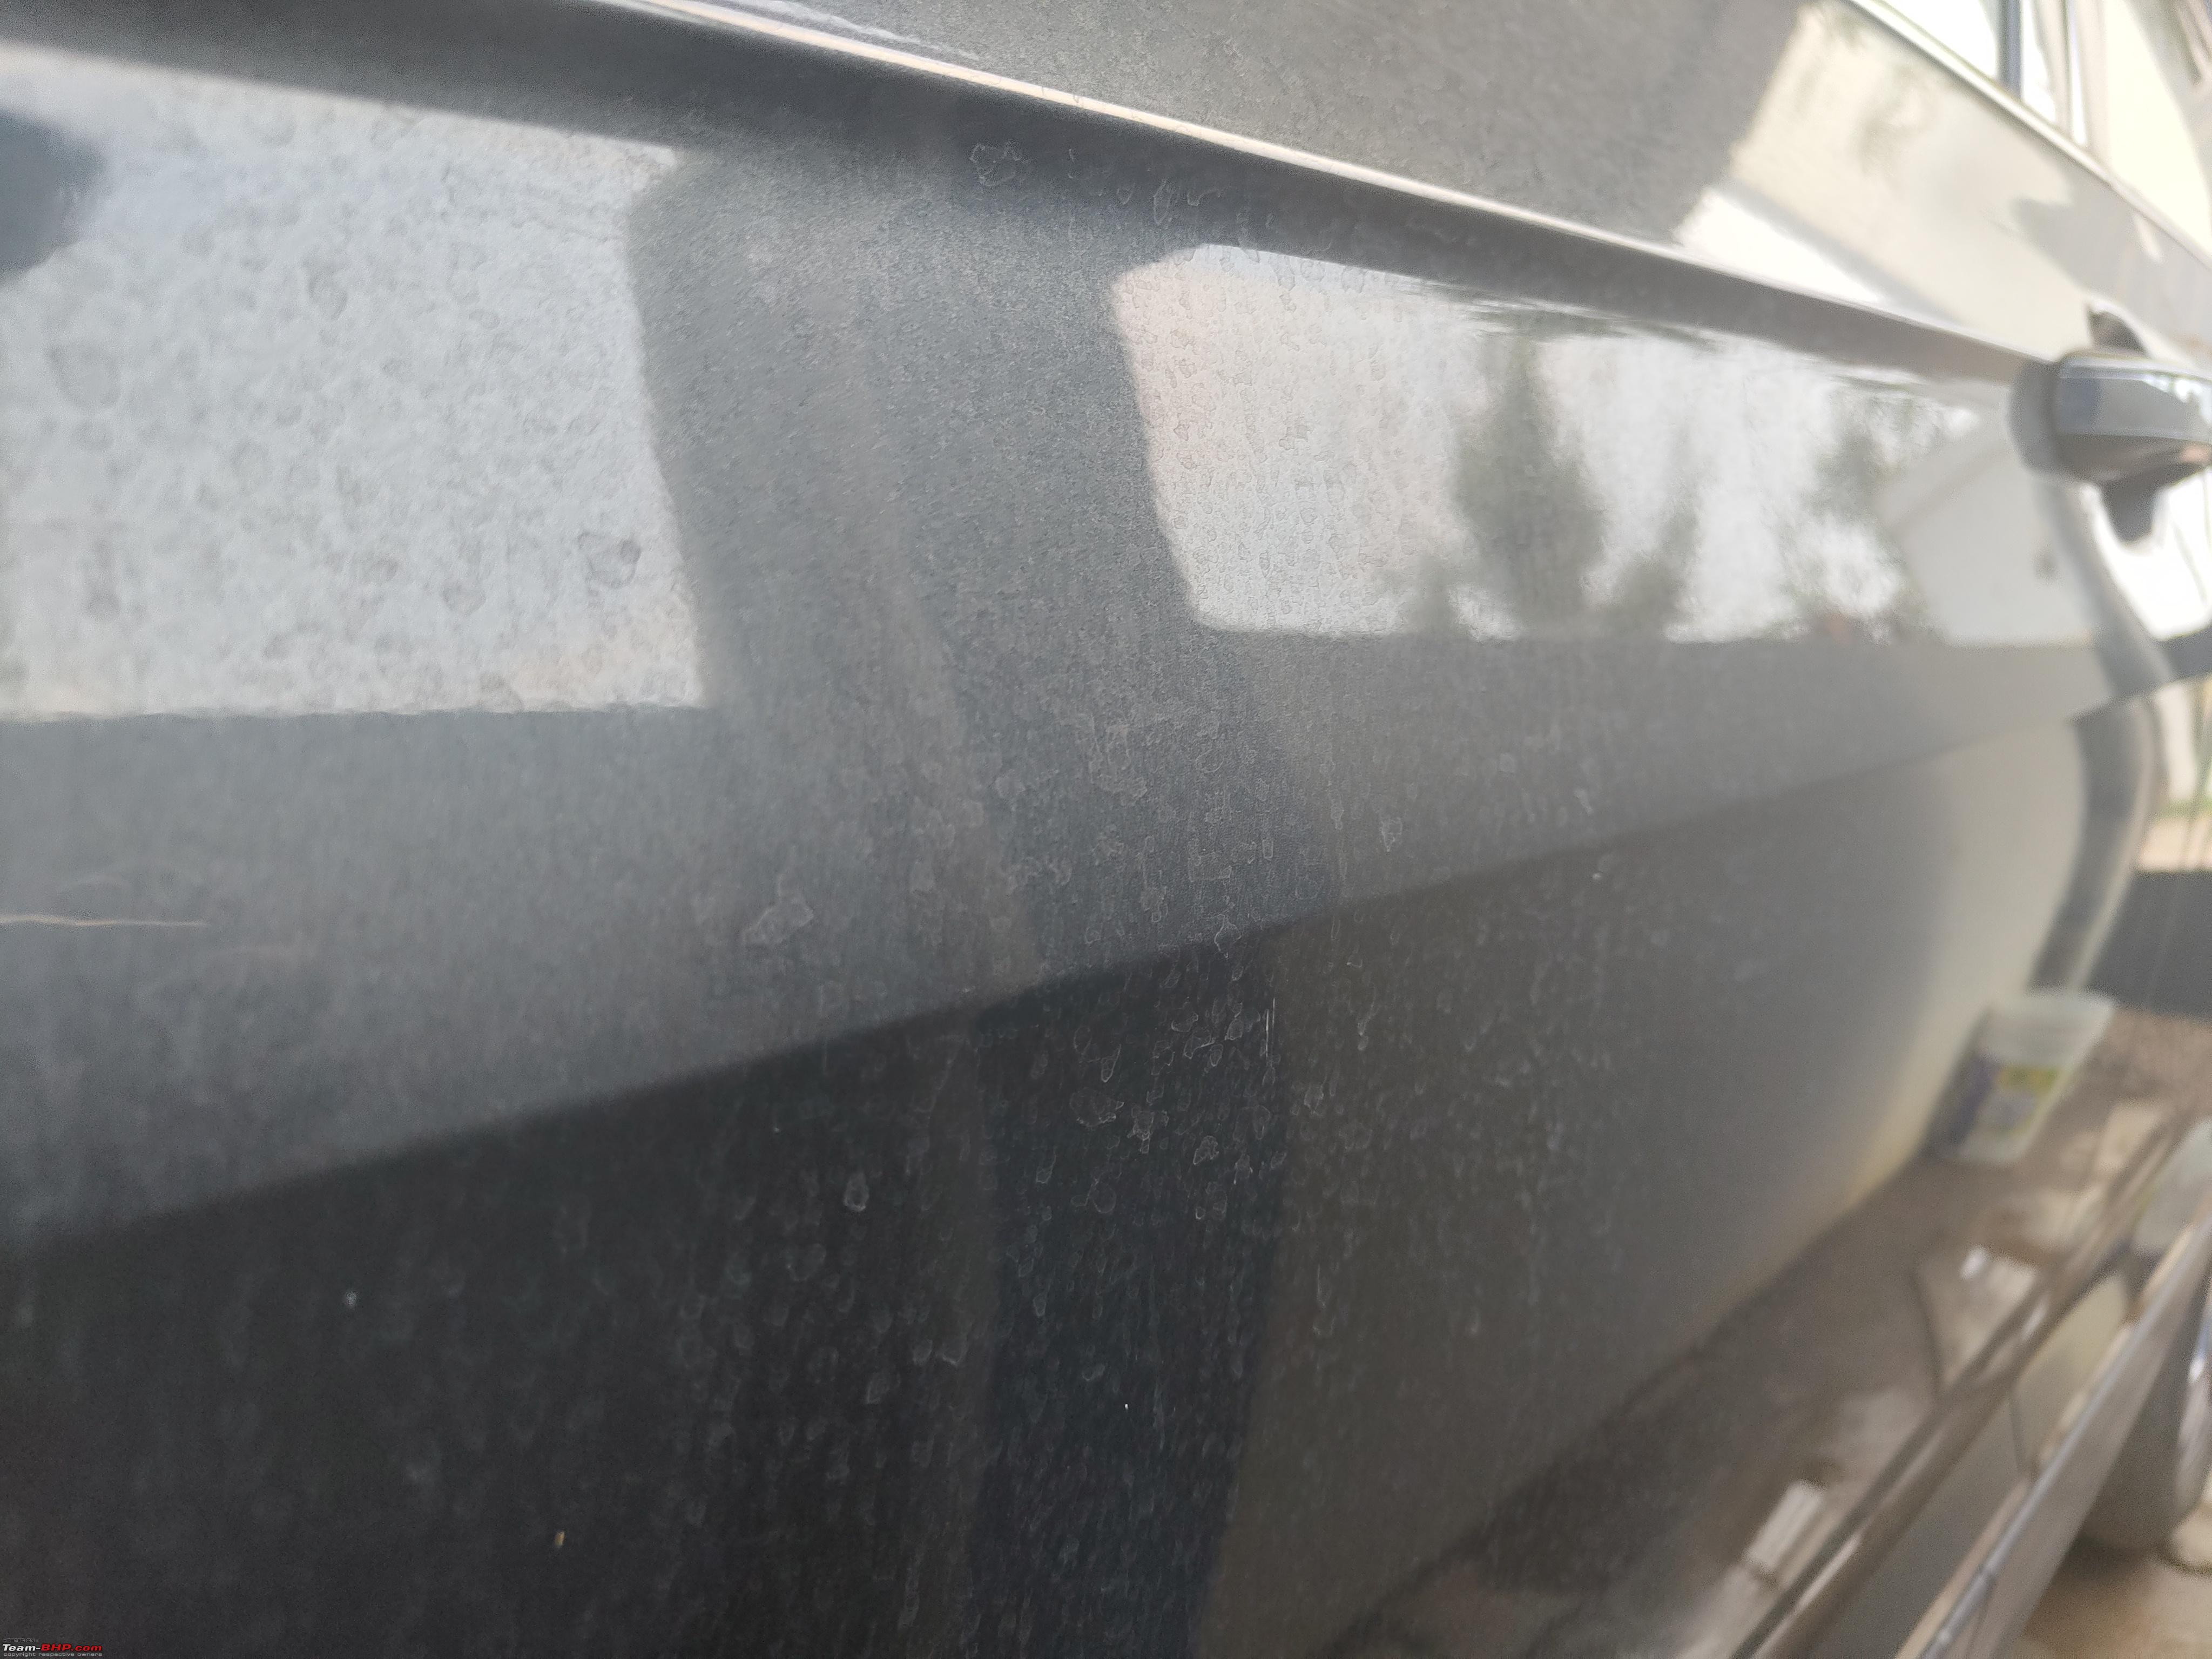 Black Car Paint Light Scratches & Water Spots Remover Remove Water Spots &  Oxidation / Restore Mirror